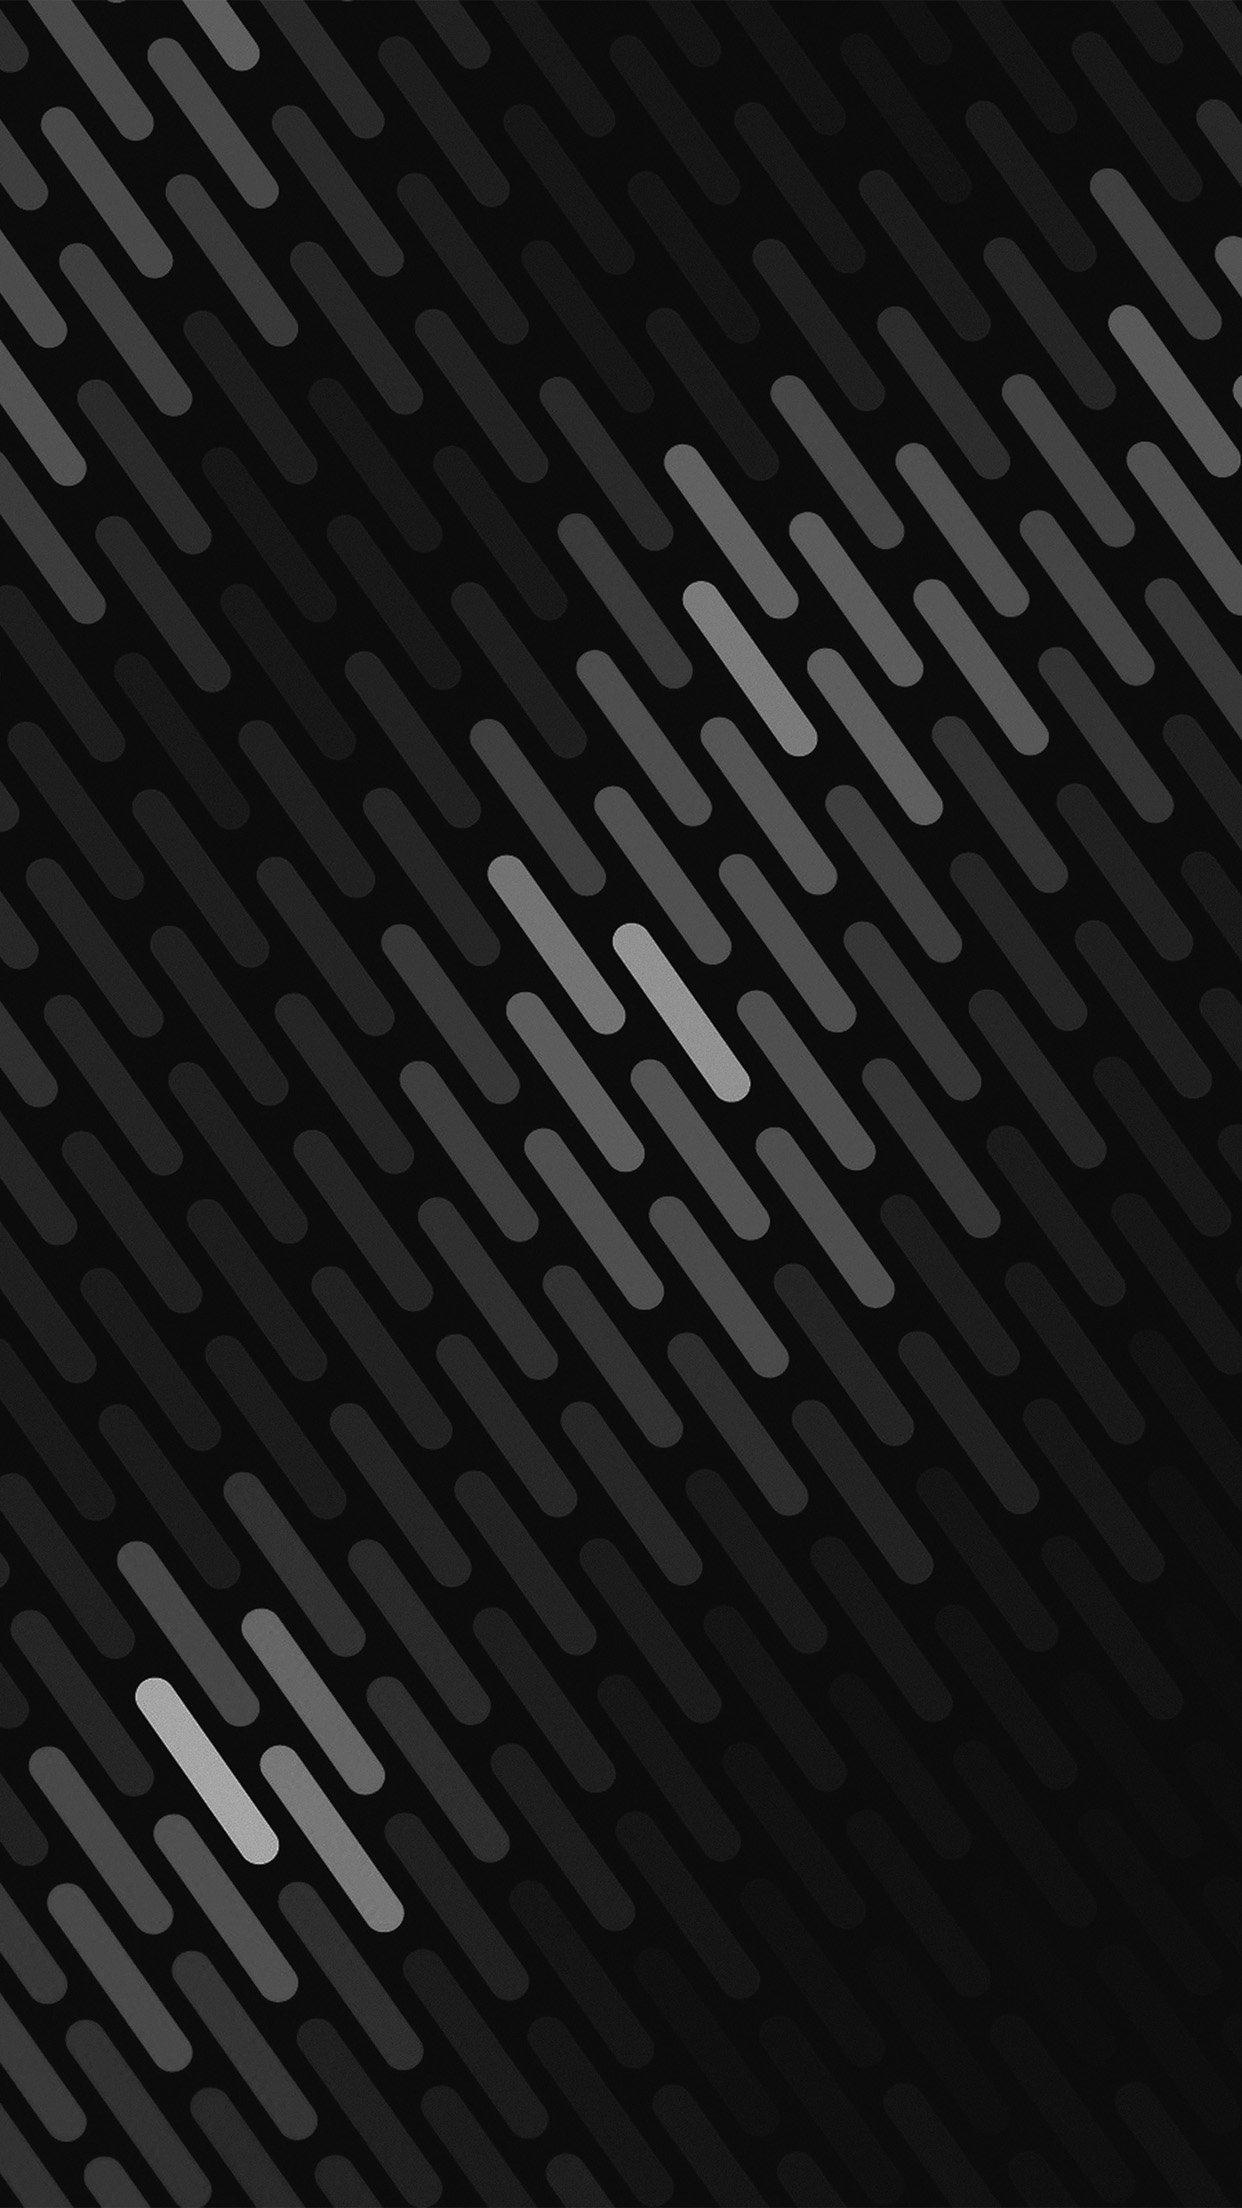 Black And White iPhone X Wallpaper